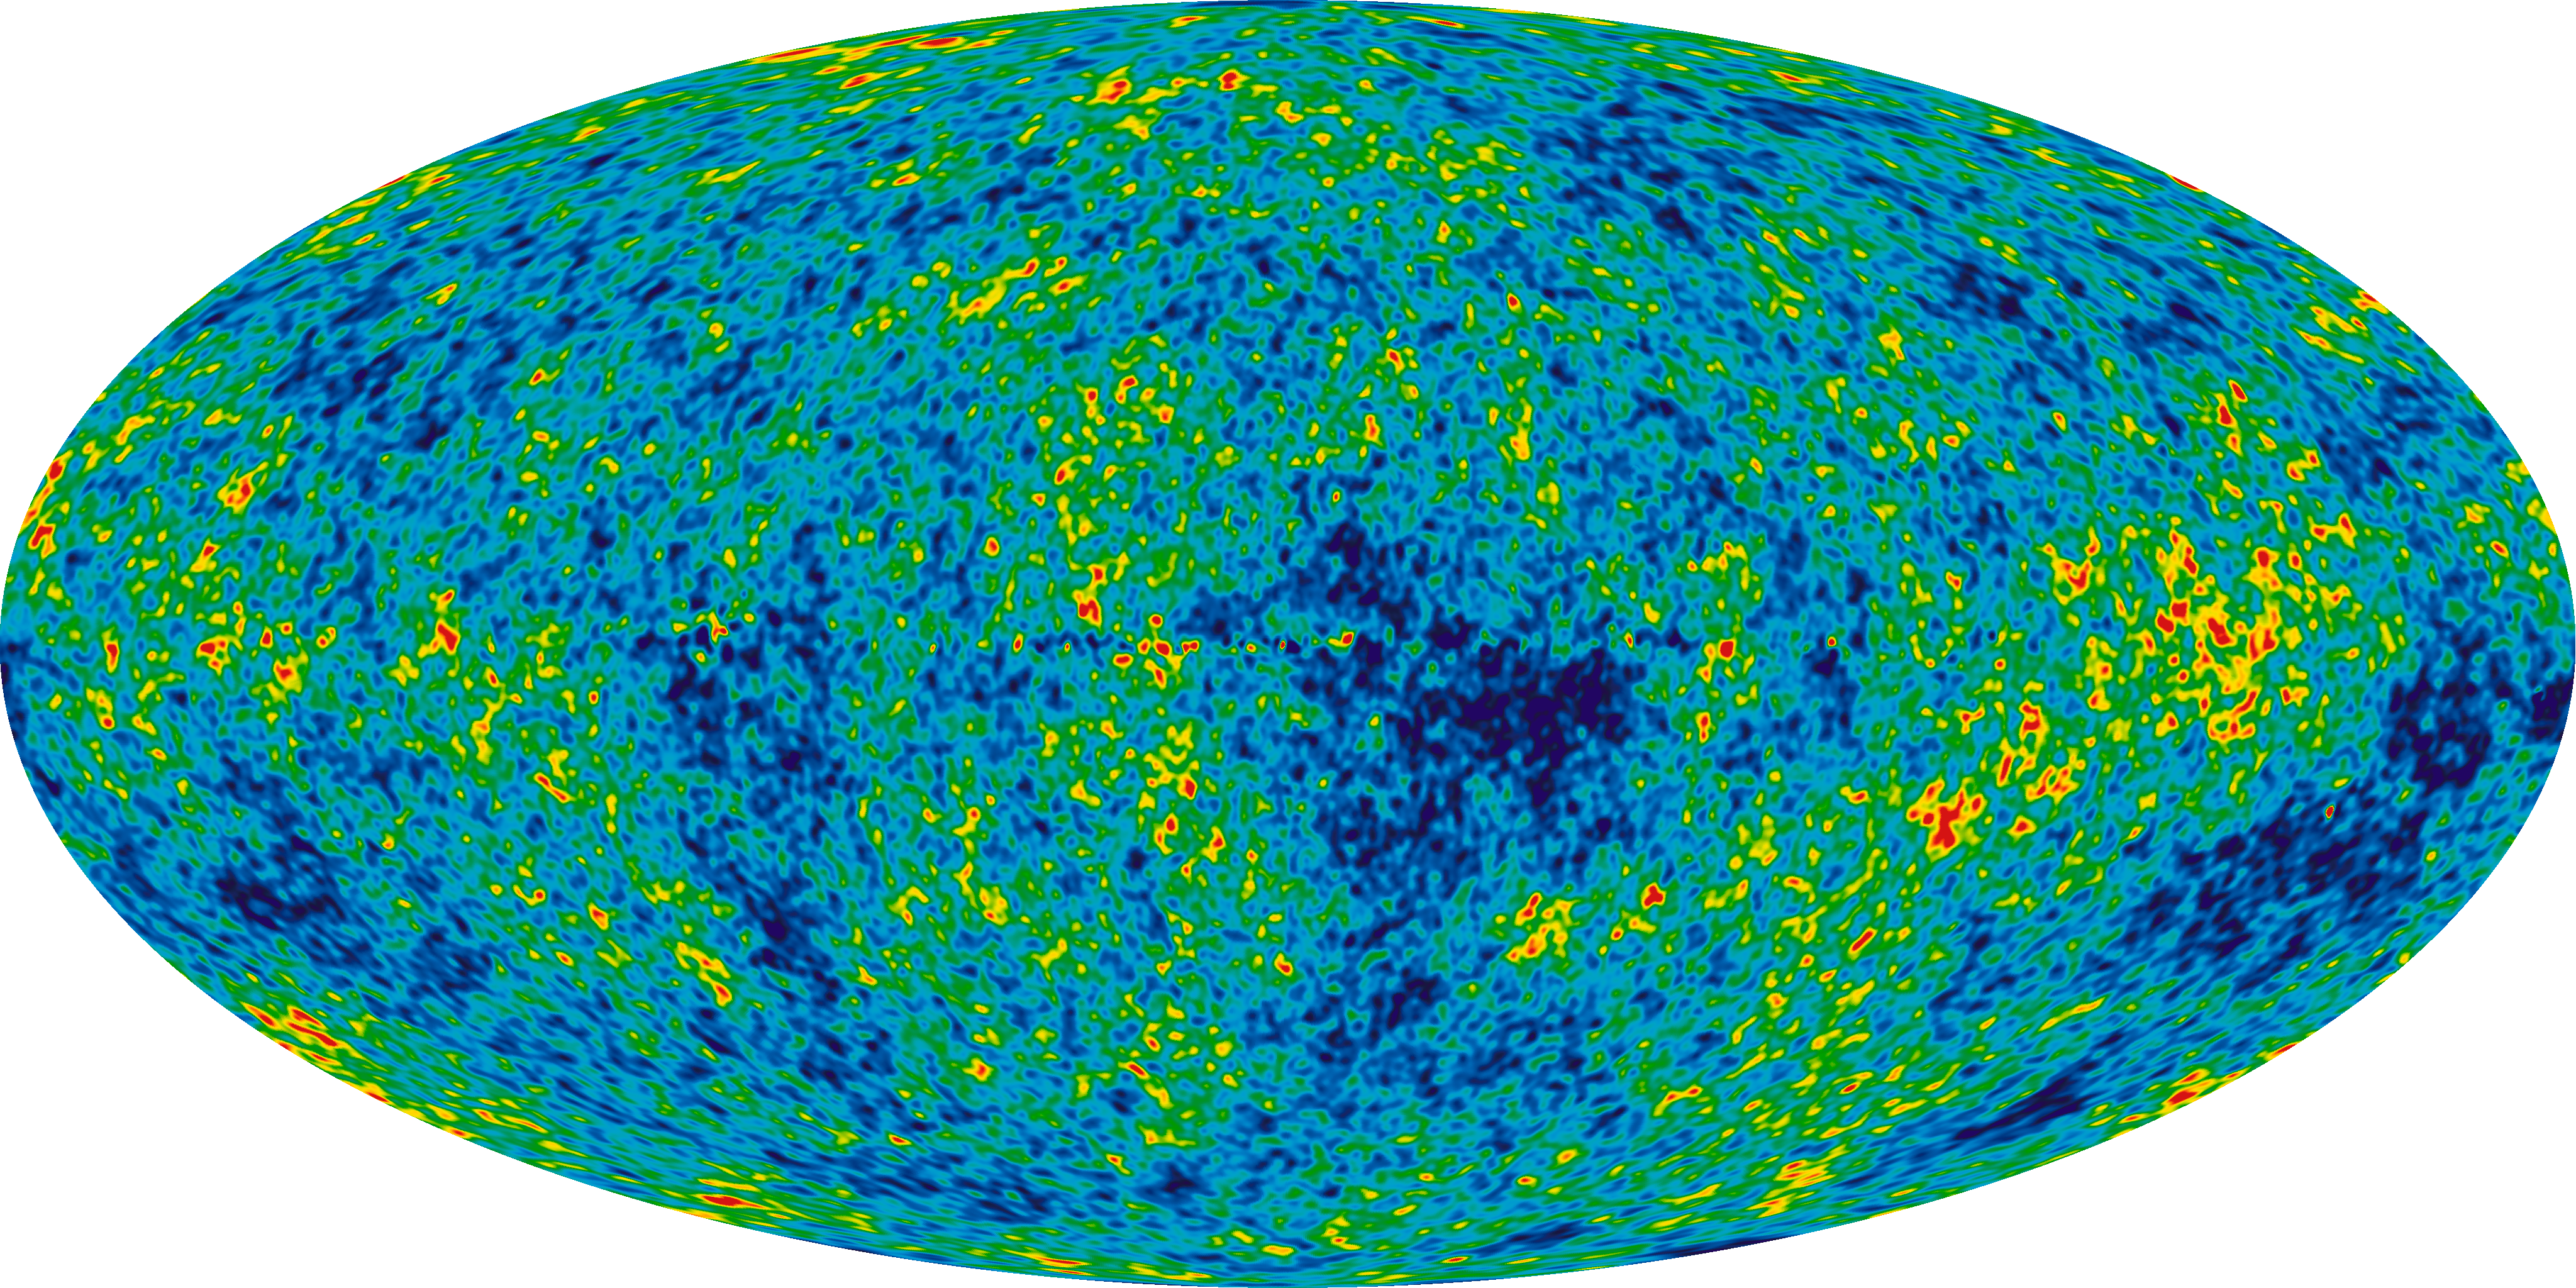 a color-coded map of the sky showing differences in temperature in the universe